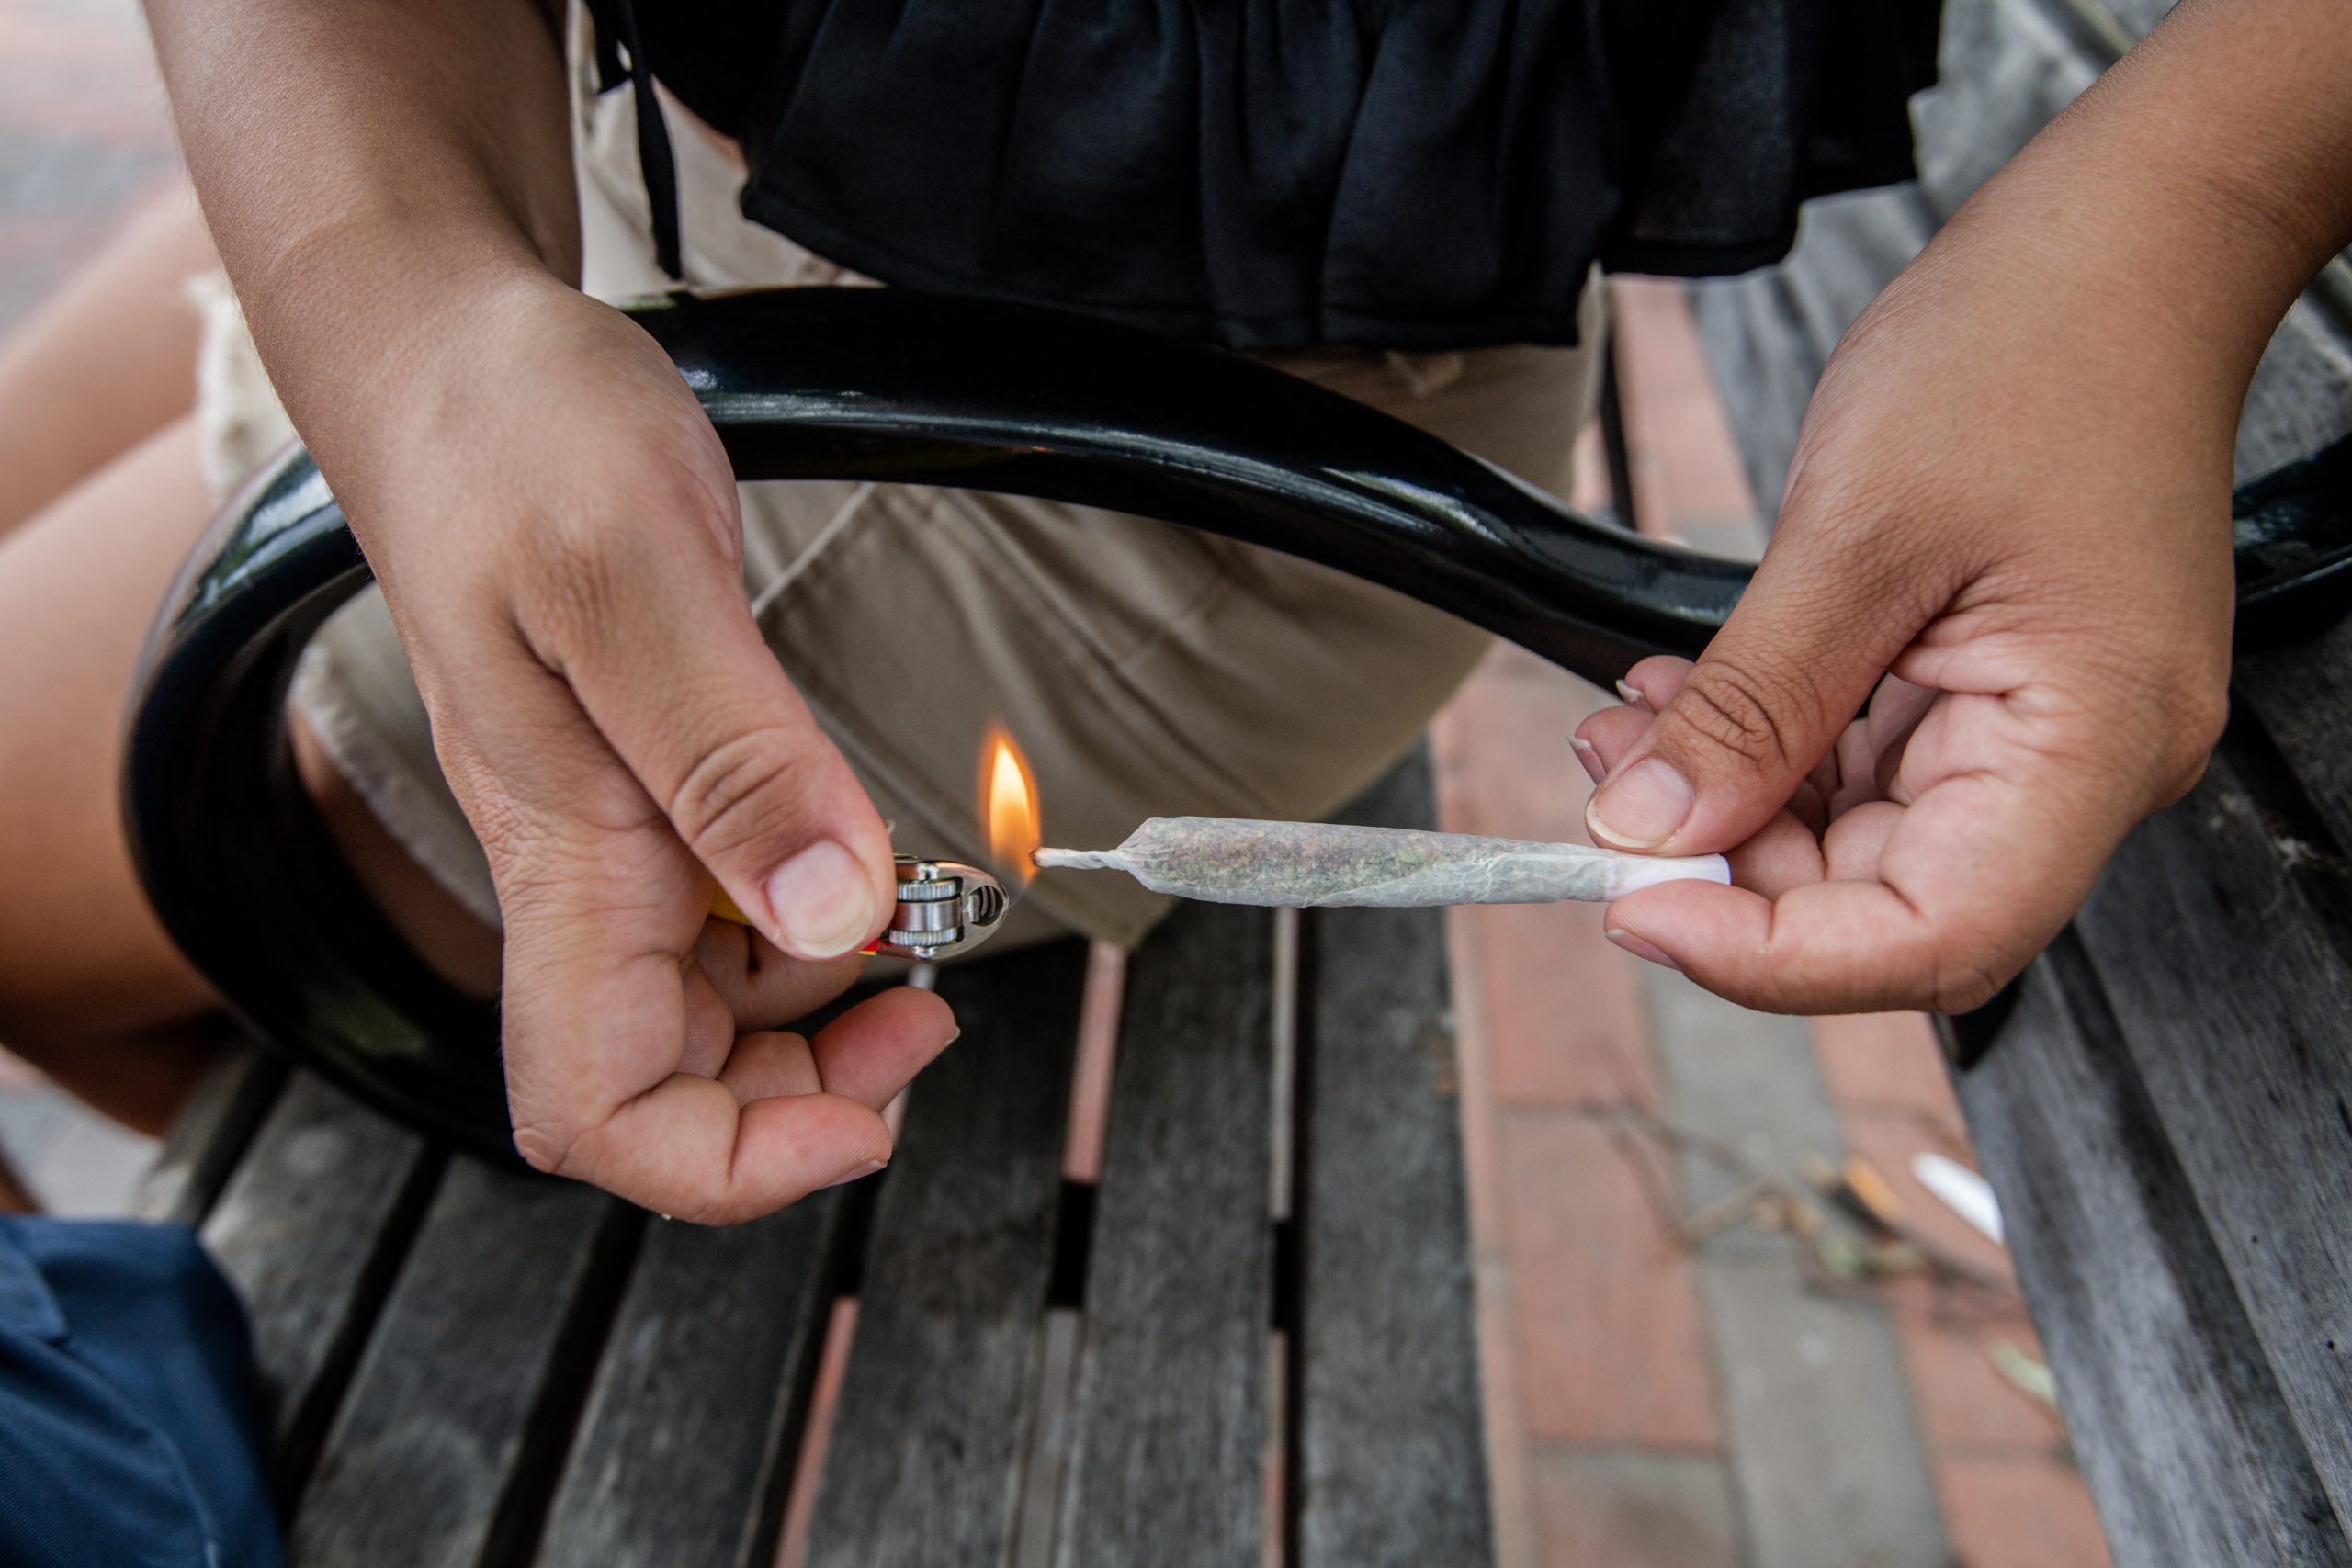 Eight Startling Effects of Marijuana Use You Need to Know